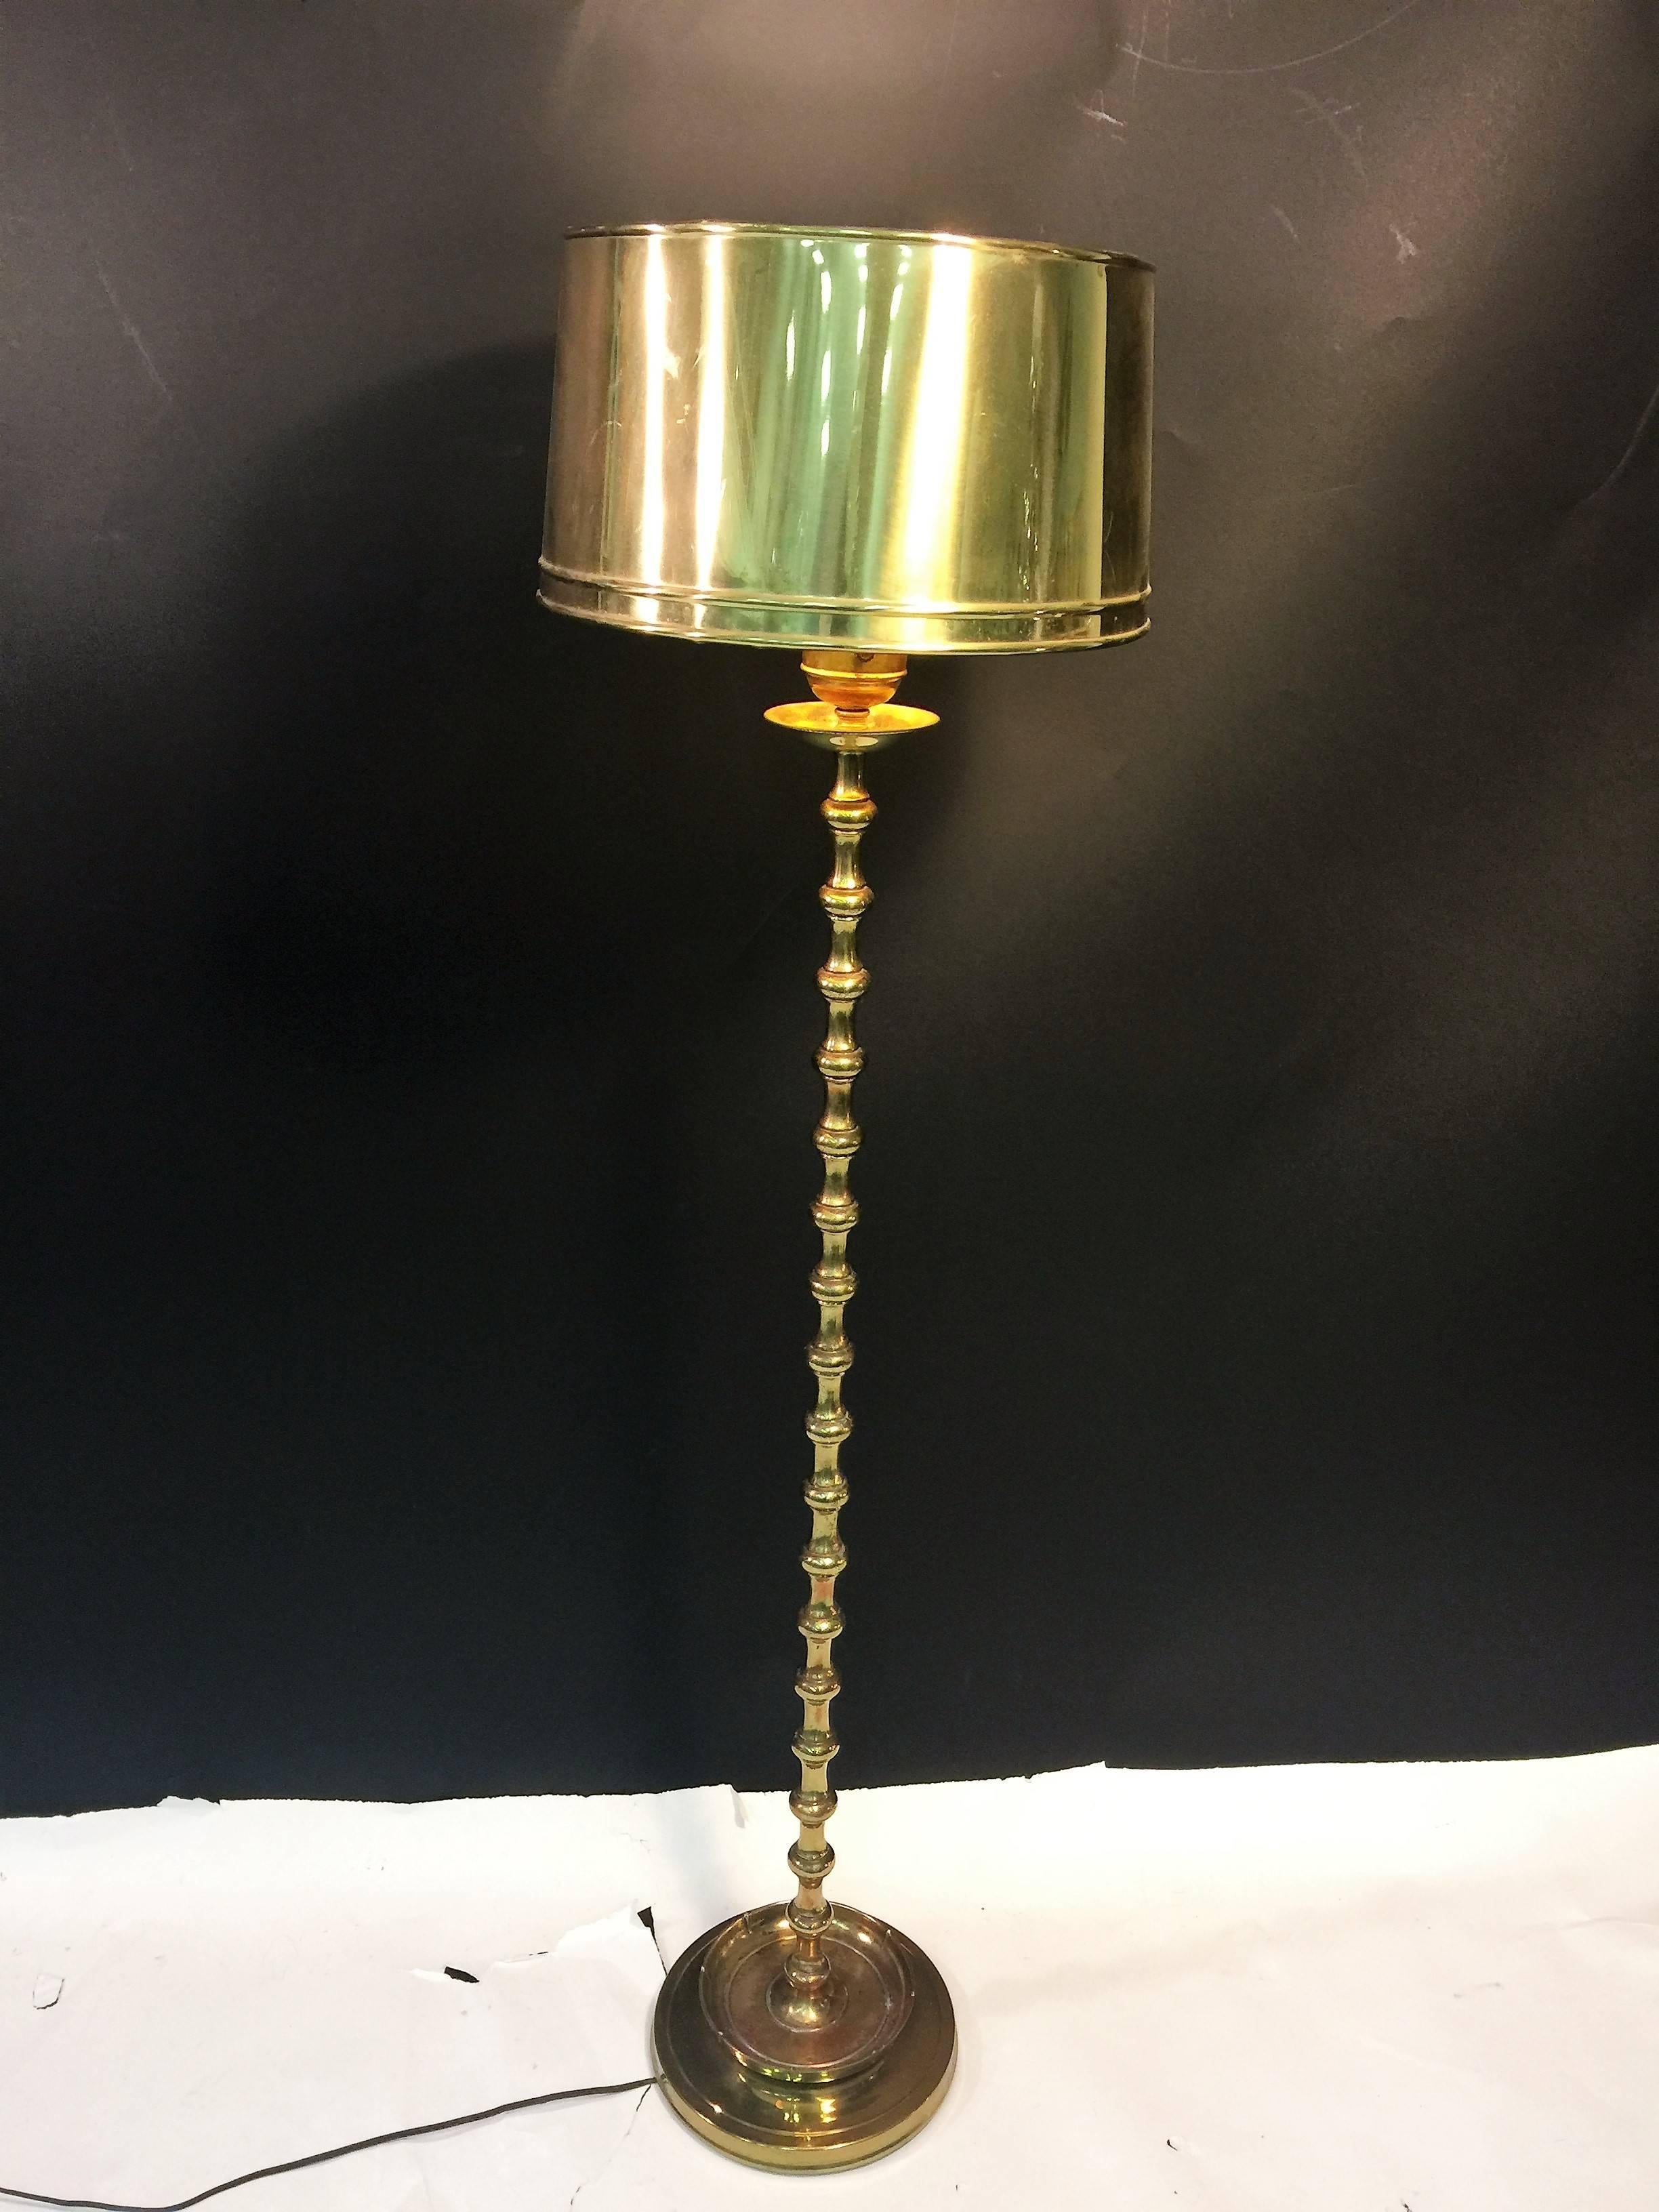 Great solid brass lamp in a moderne neoclassical style. Fitted with the original brass drum shade. The brass shade is 13